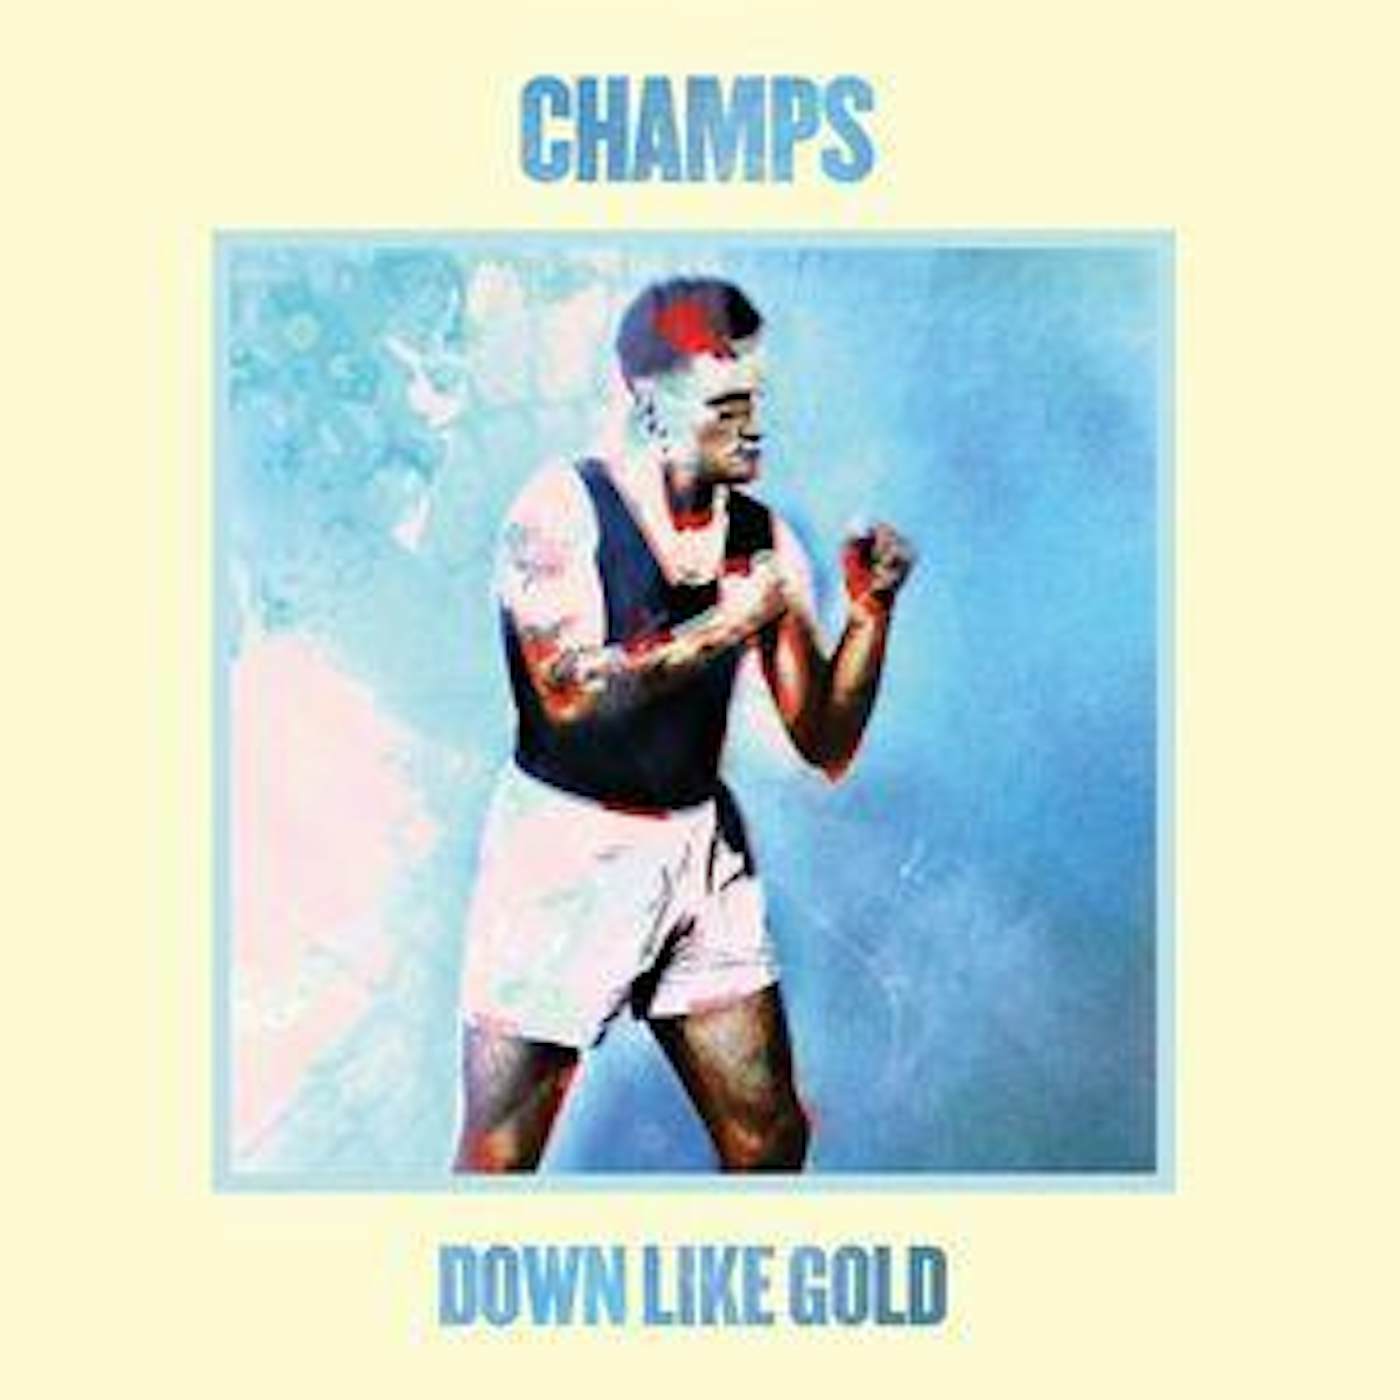 CHAMPS DOWN LIKE GOLD CD